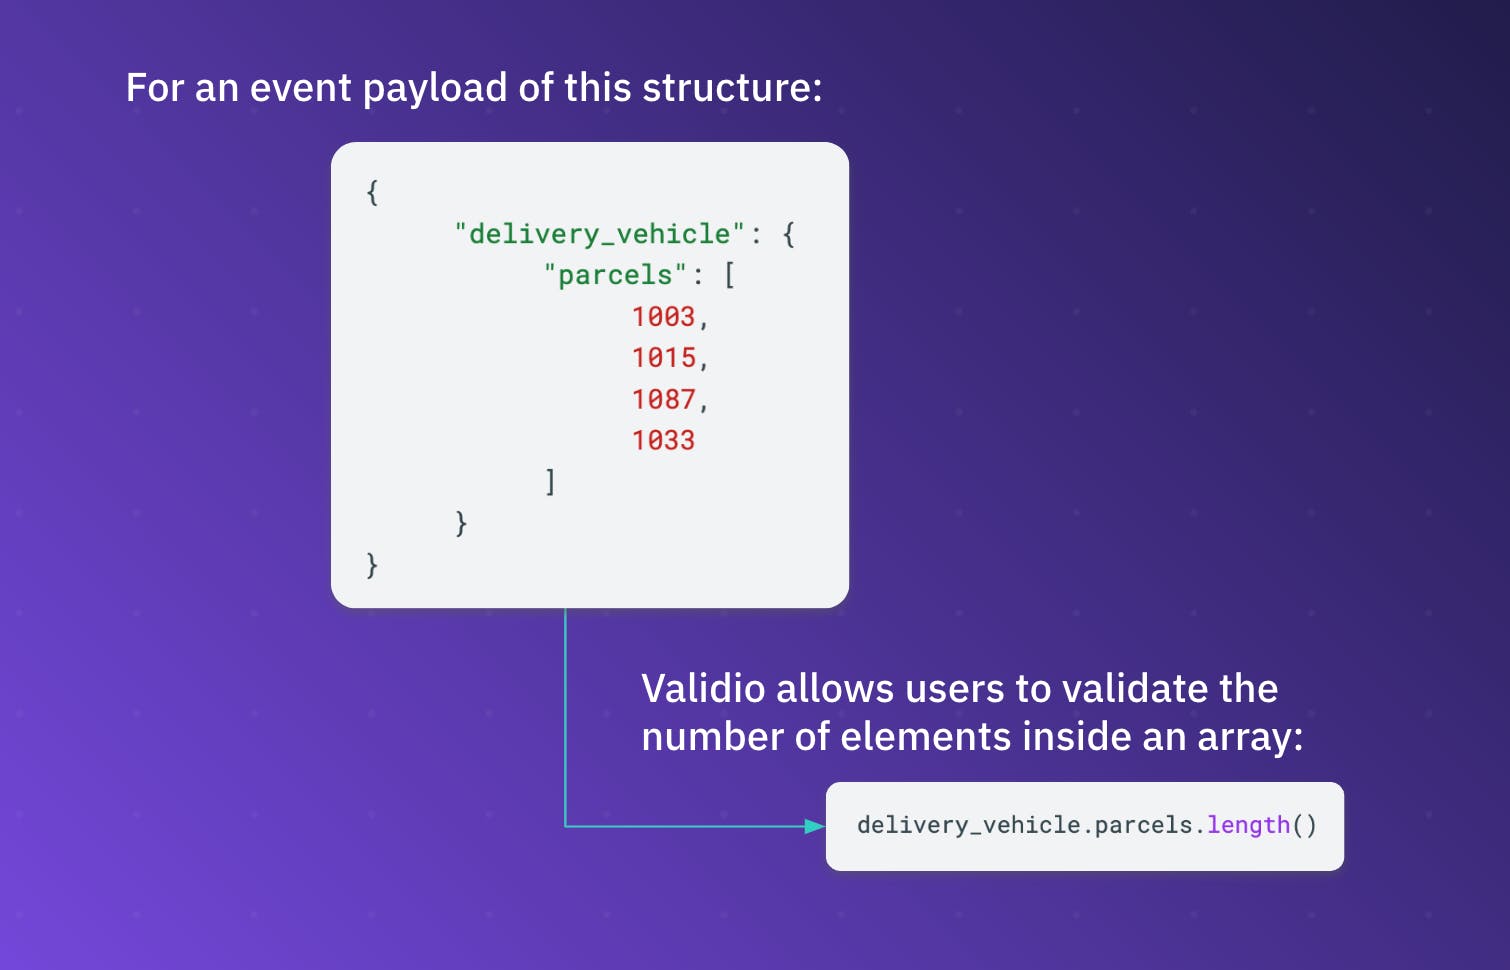 Validio lets users validate the data structure by checking the number of elements inside an array.